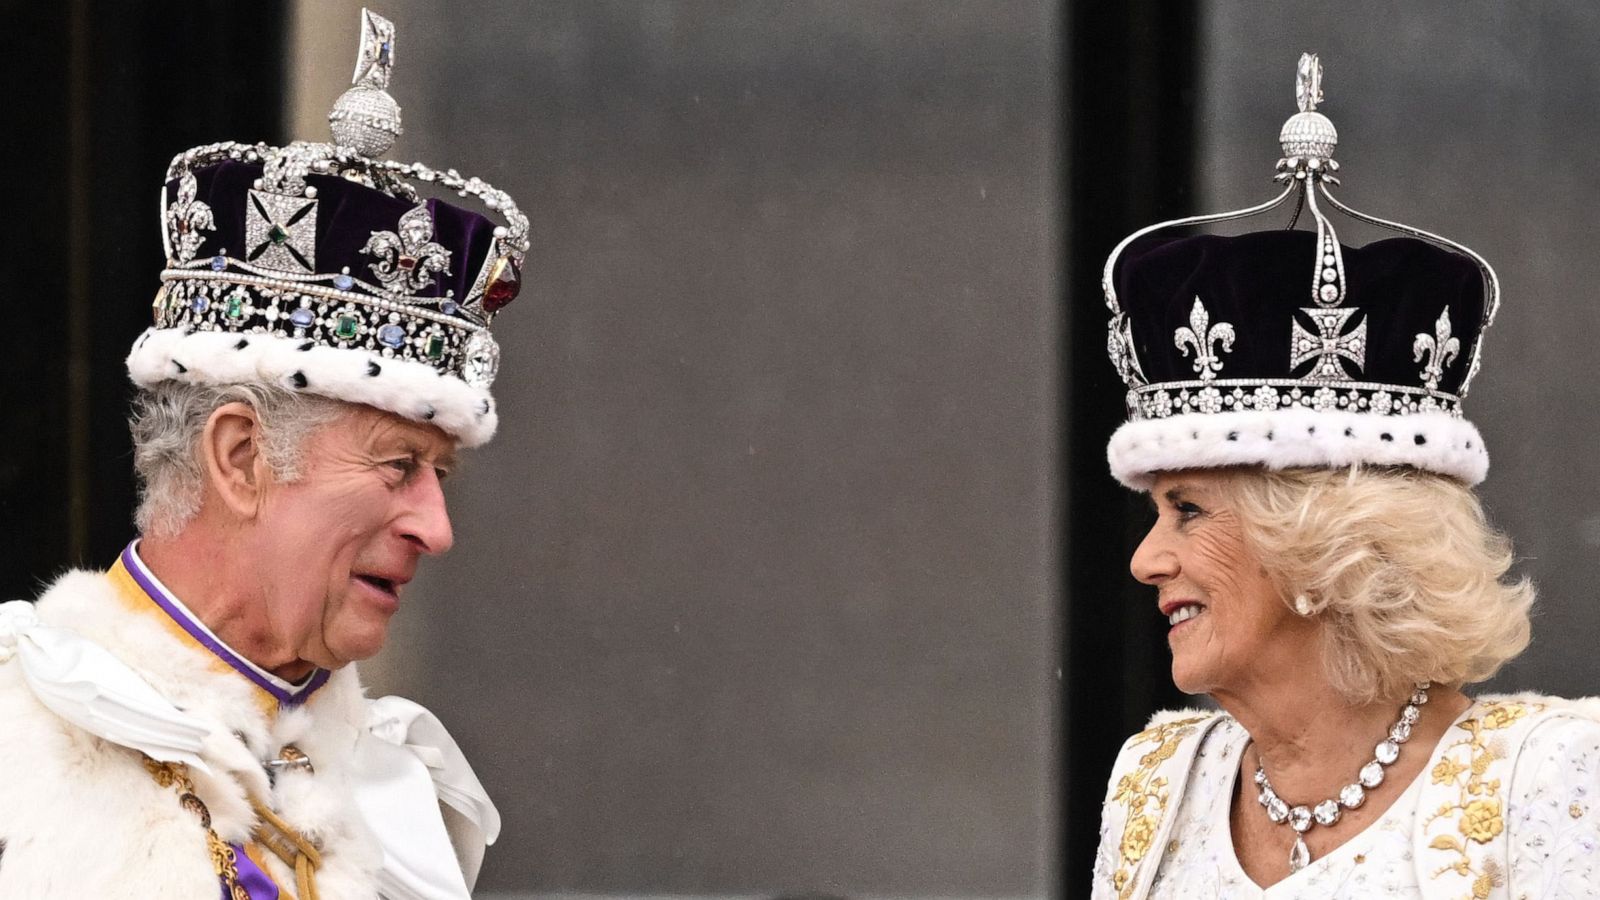 King Charles Will Receive New Wedding Ring at Coronation